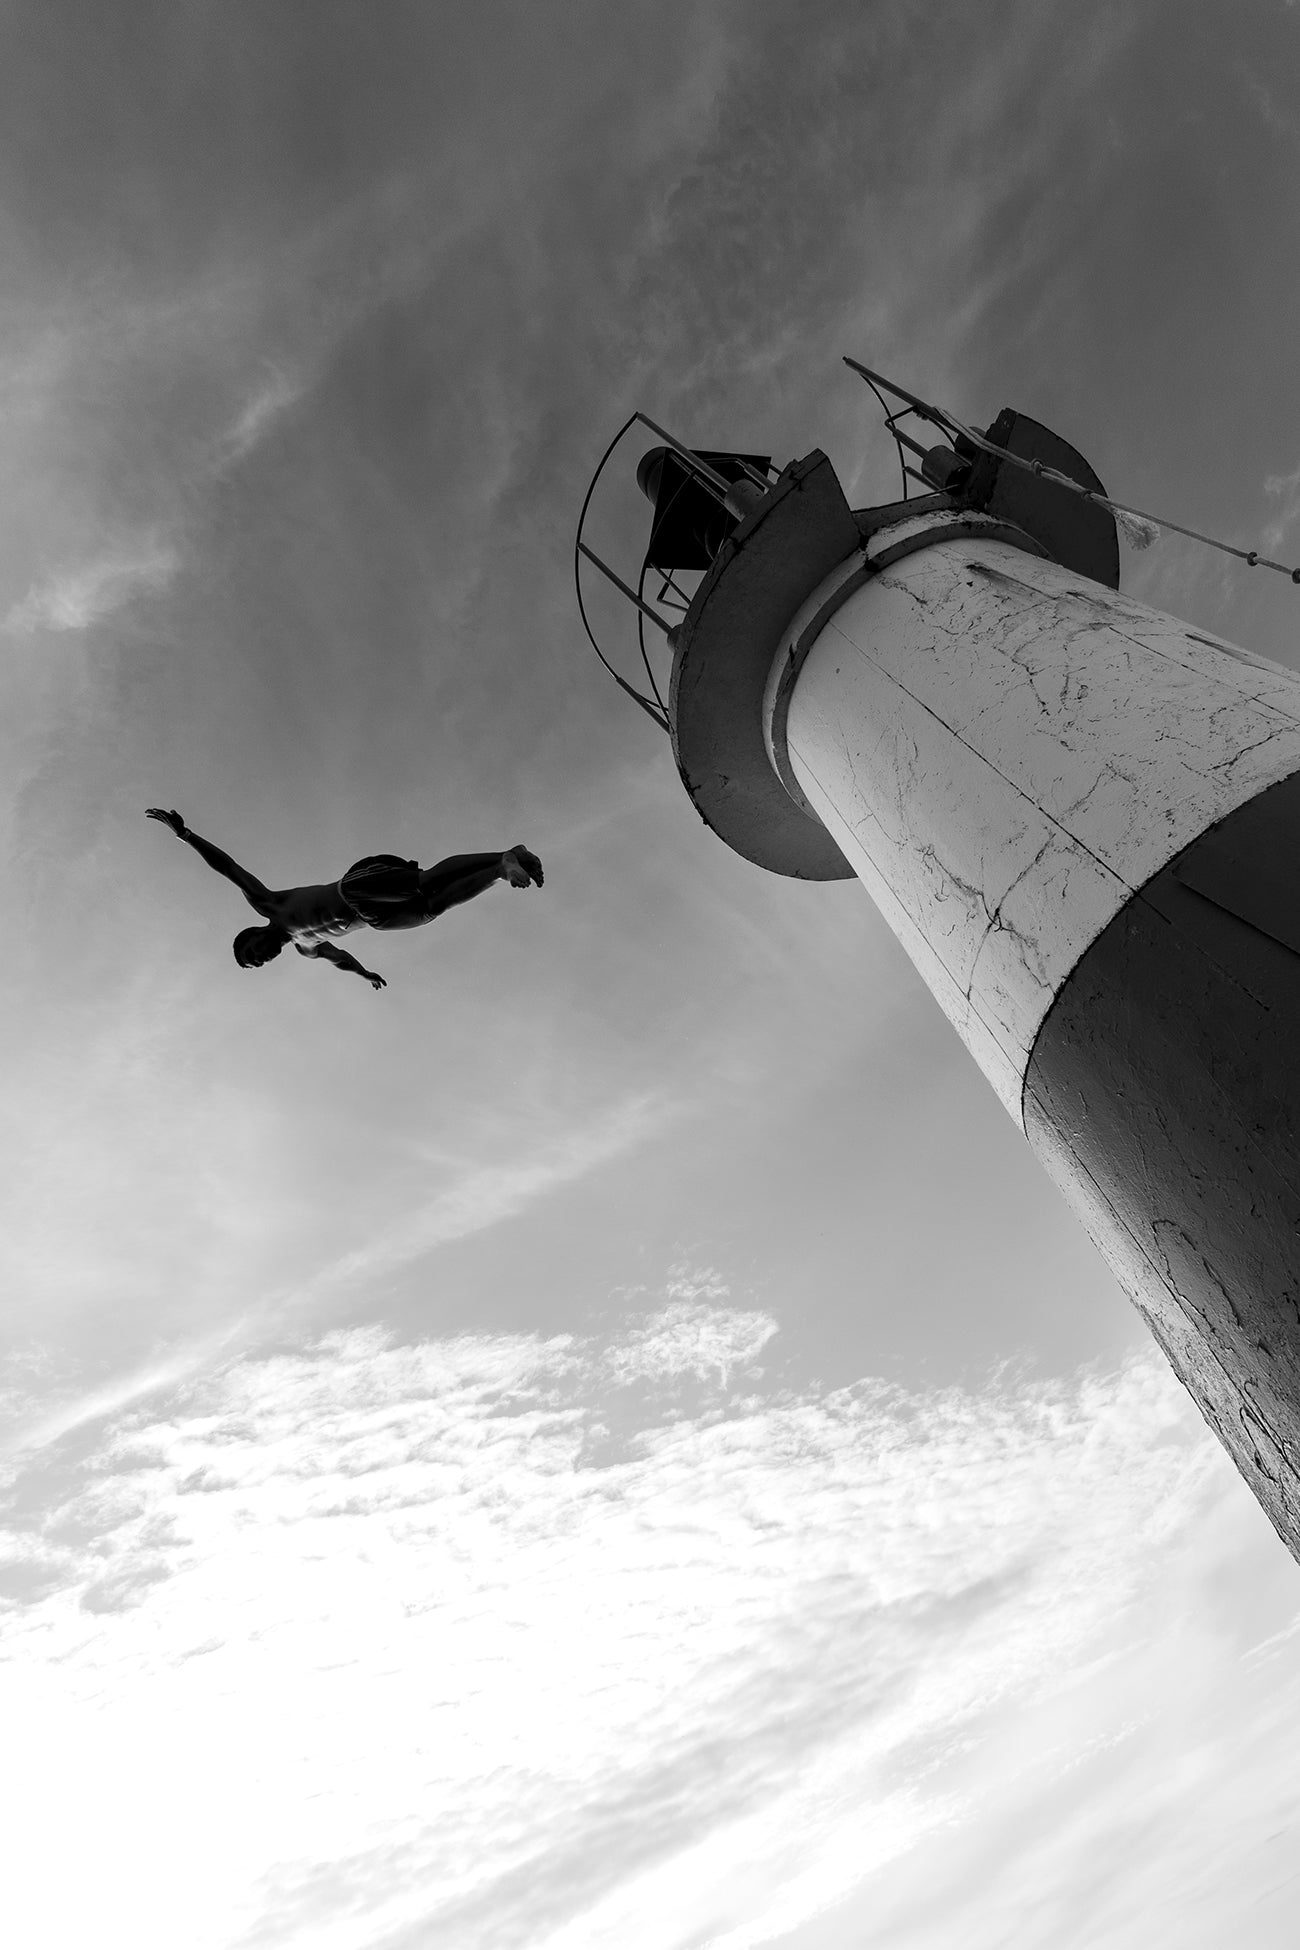 The jump and the lighthouse